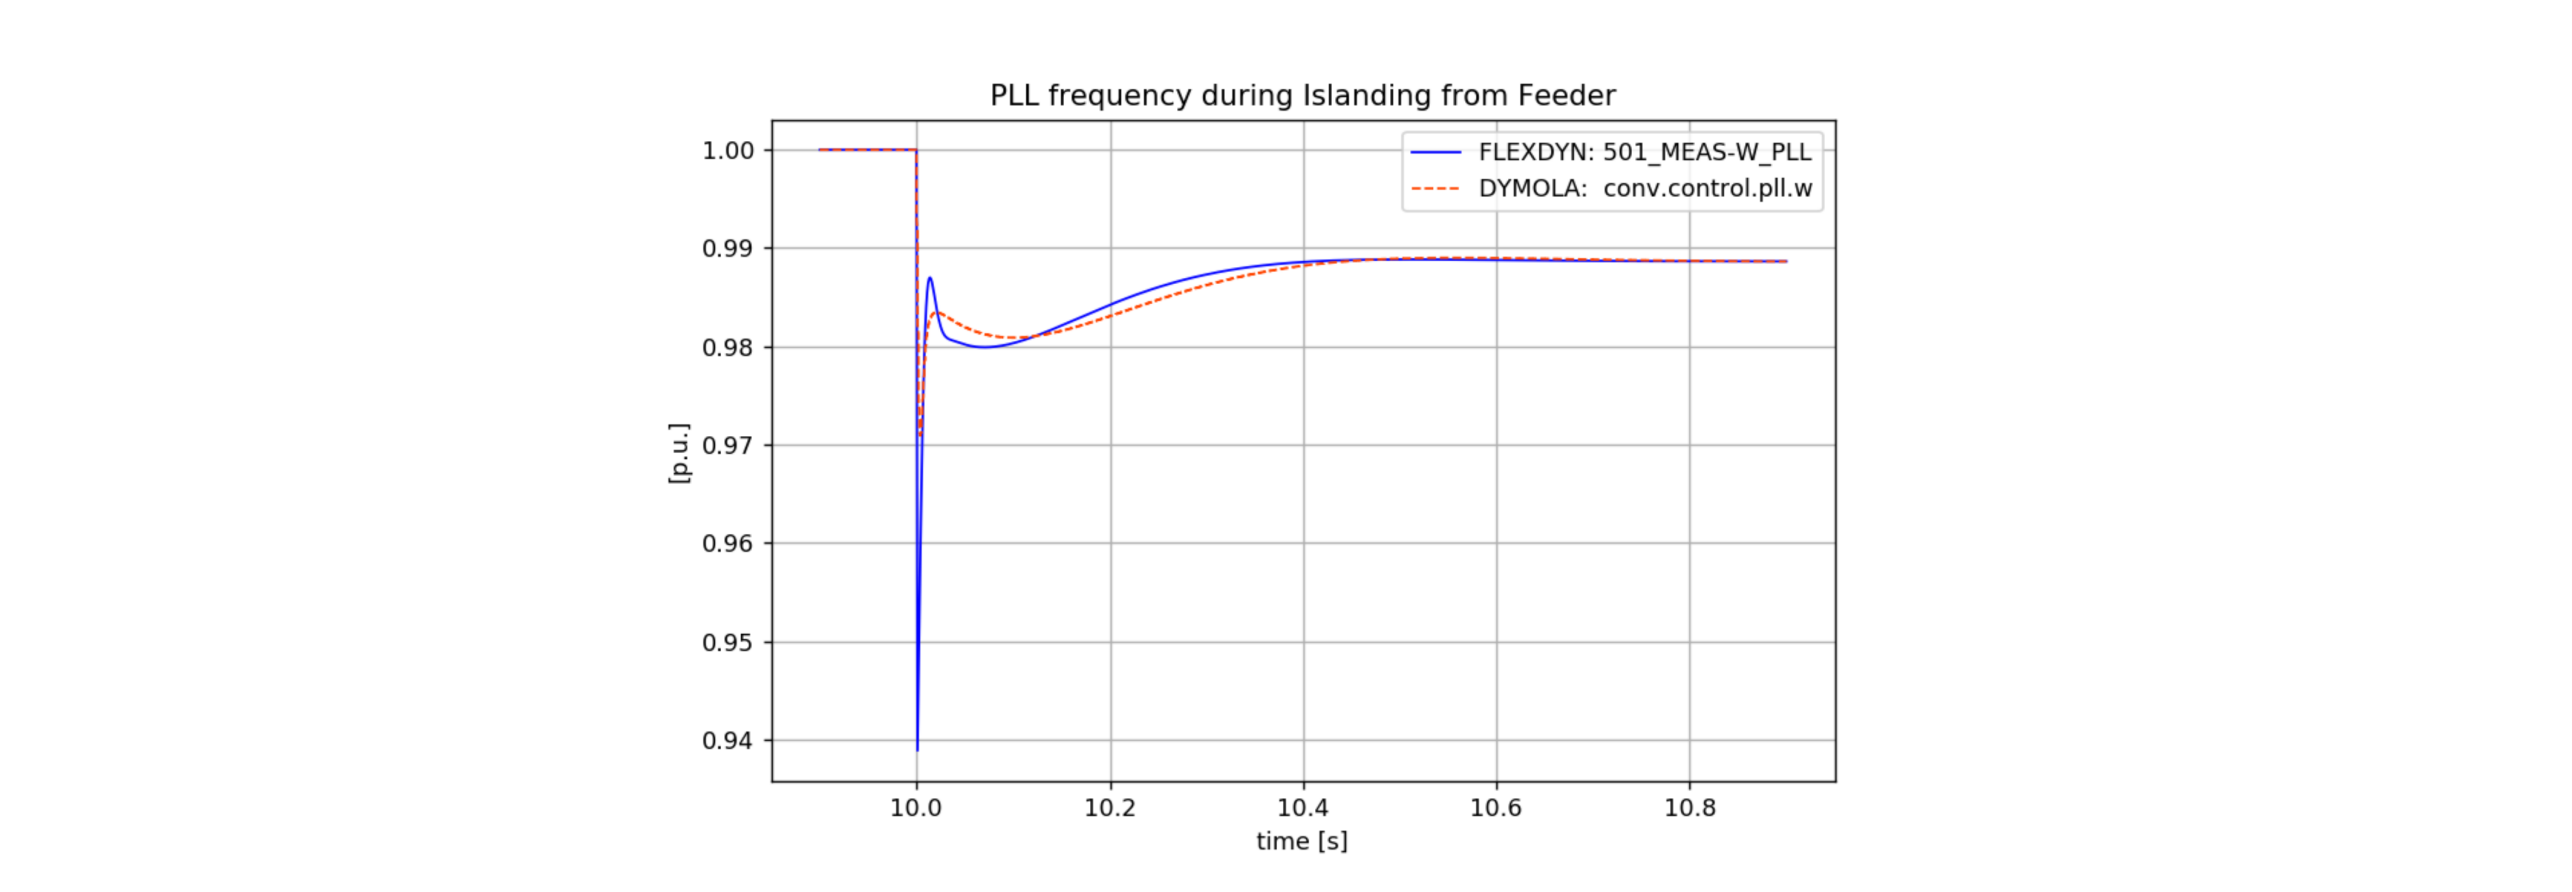 Figure: Distribution grid with VSM converter control, frequency during islanding scenario. This transient is part of the validation scenario for the two dynamic simulators of the project partners.